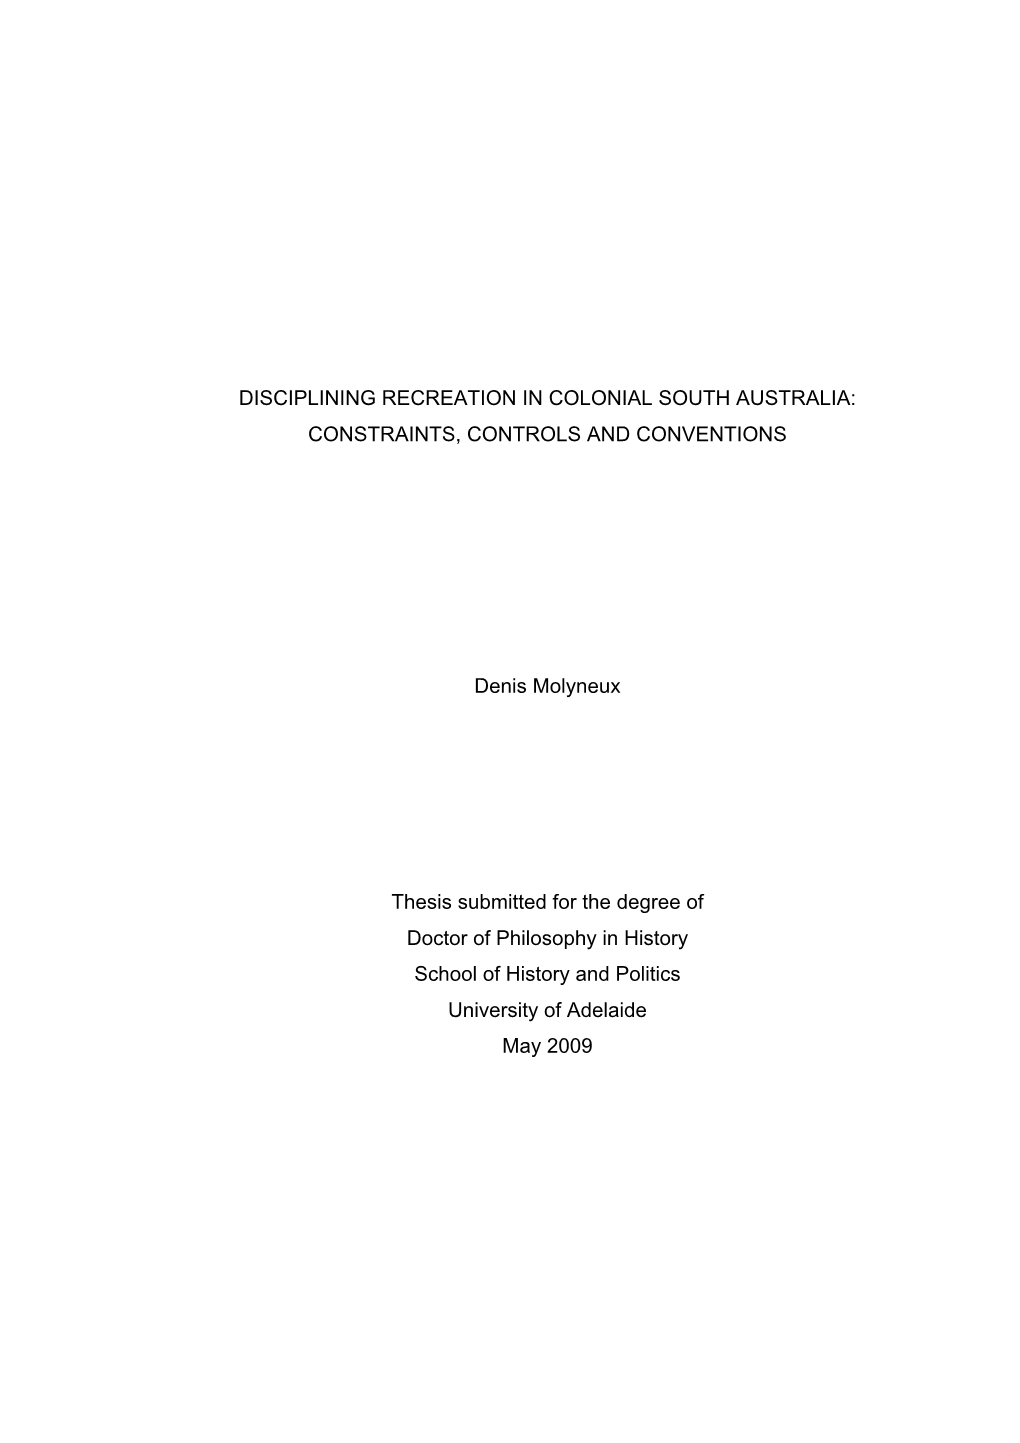 Disciplining Recreation in Colonial South Australia: Constraints, Controls and Conventions